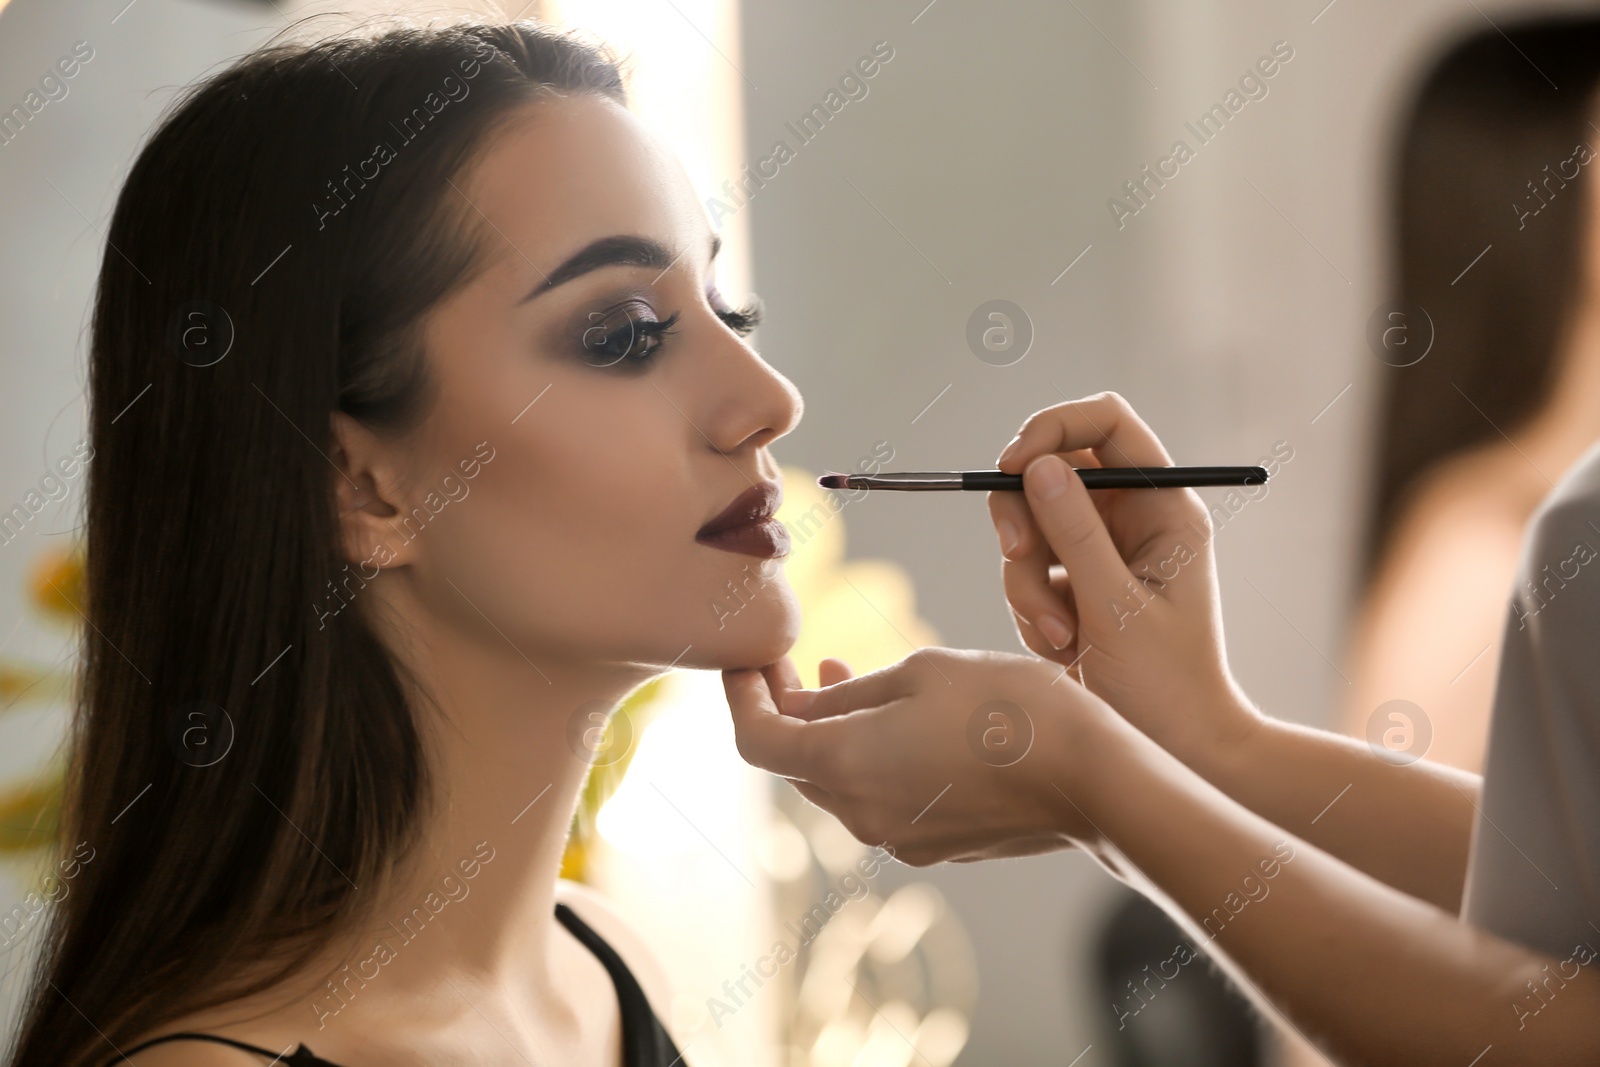 Photo of Professional visage artist applying makeup on woman's face in salon